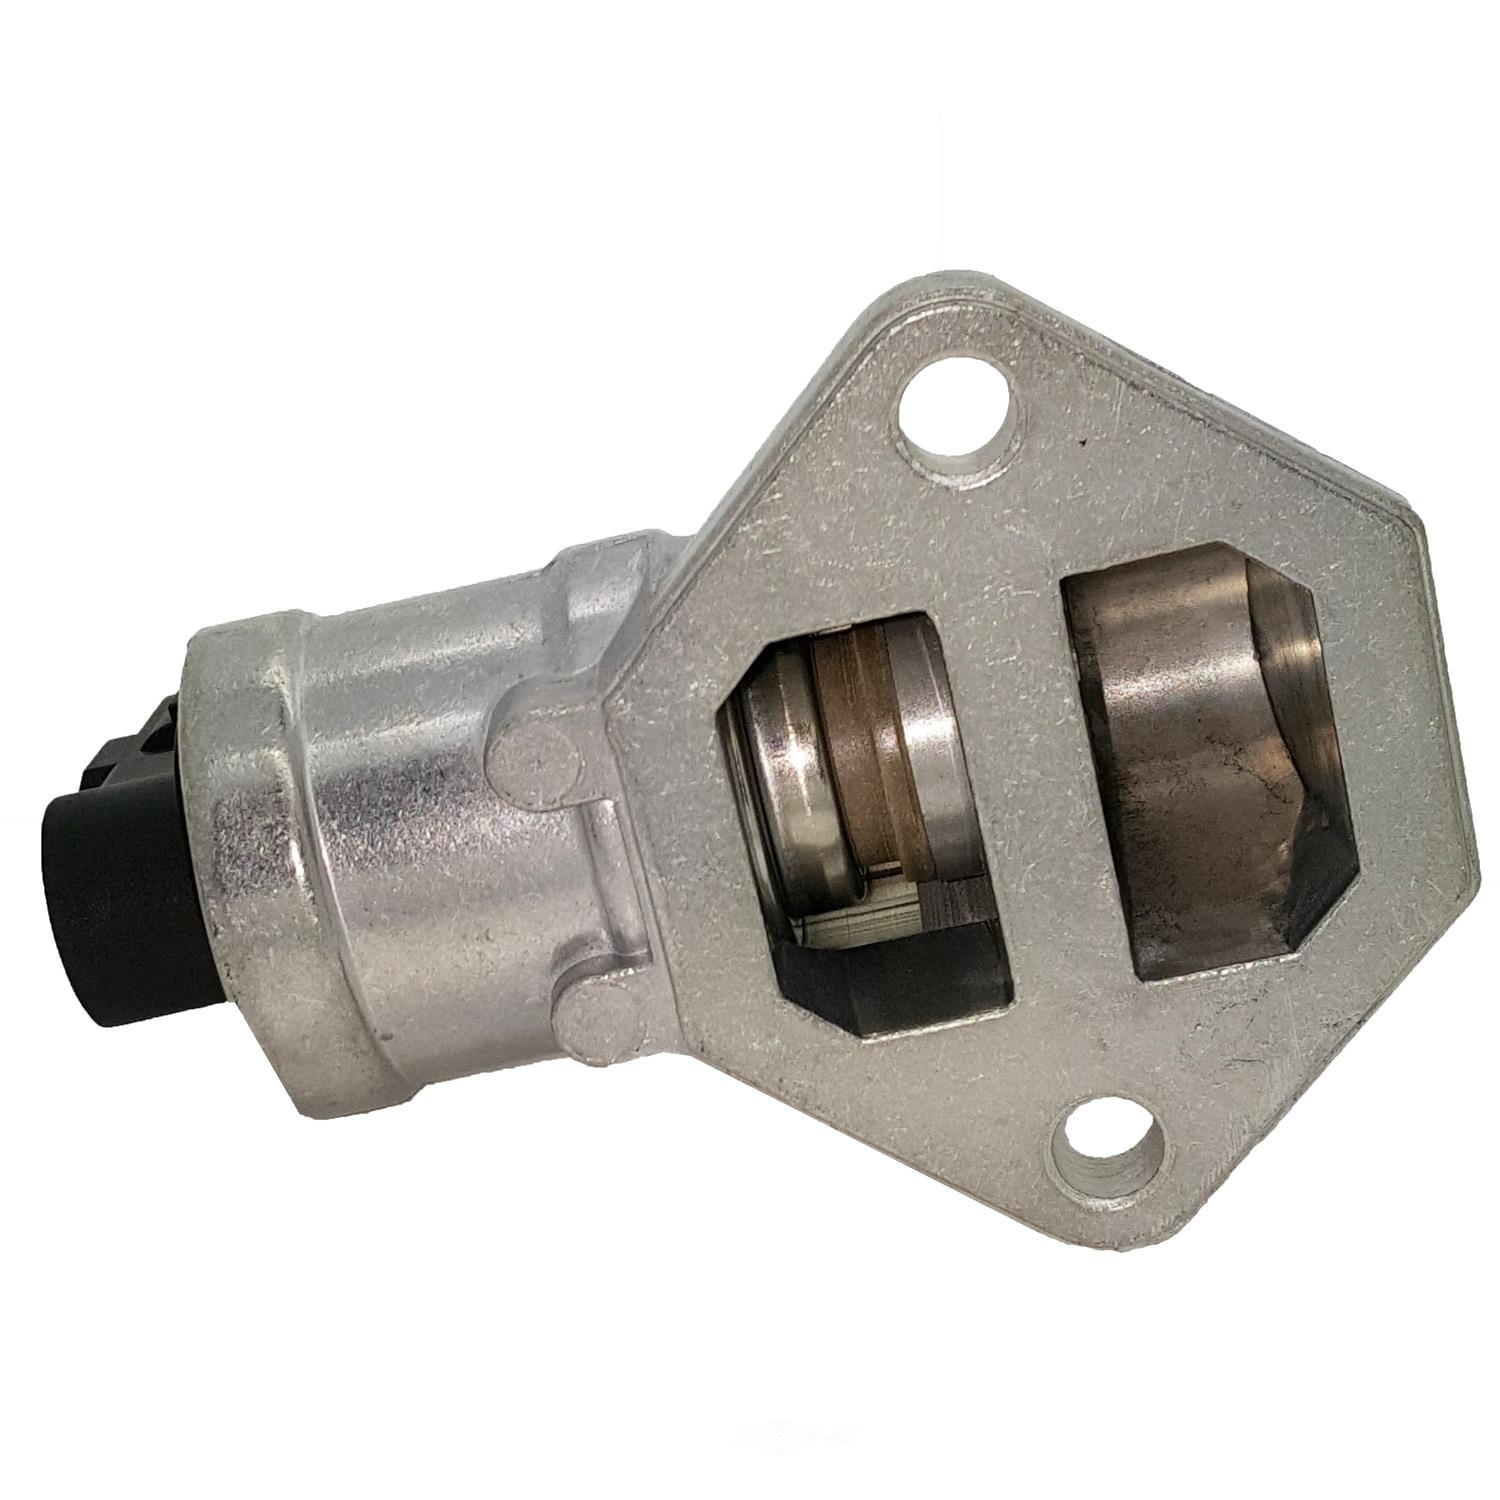 STANDARD T-SERIES - Fuel Injection Idle Air Control Valve - STT AC504T